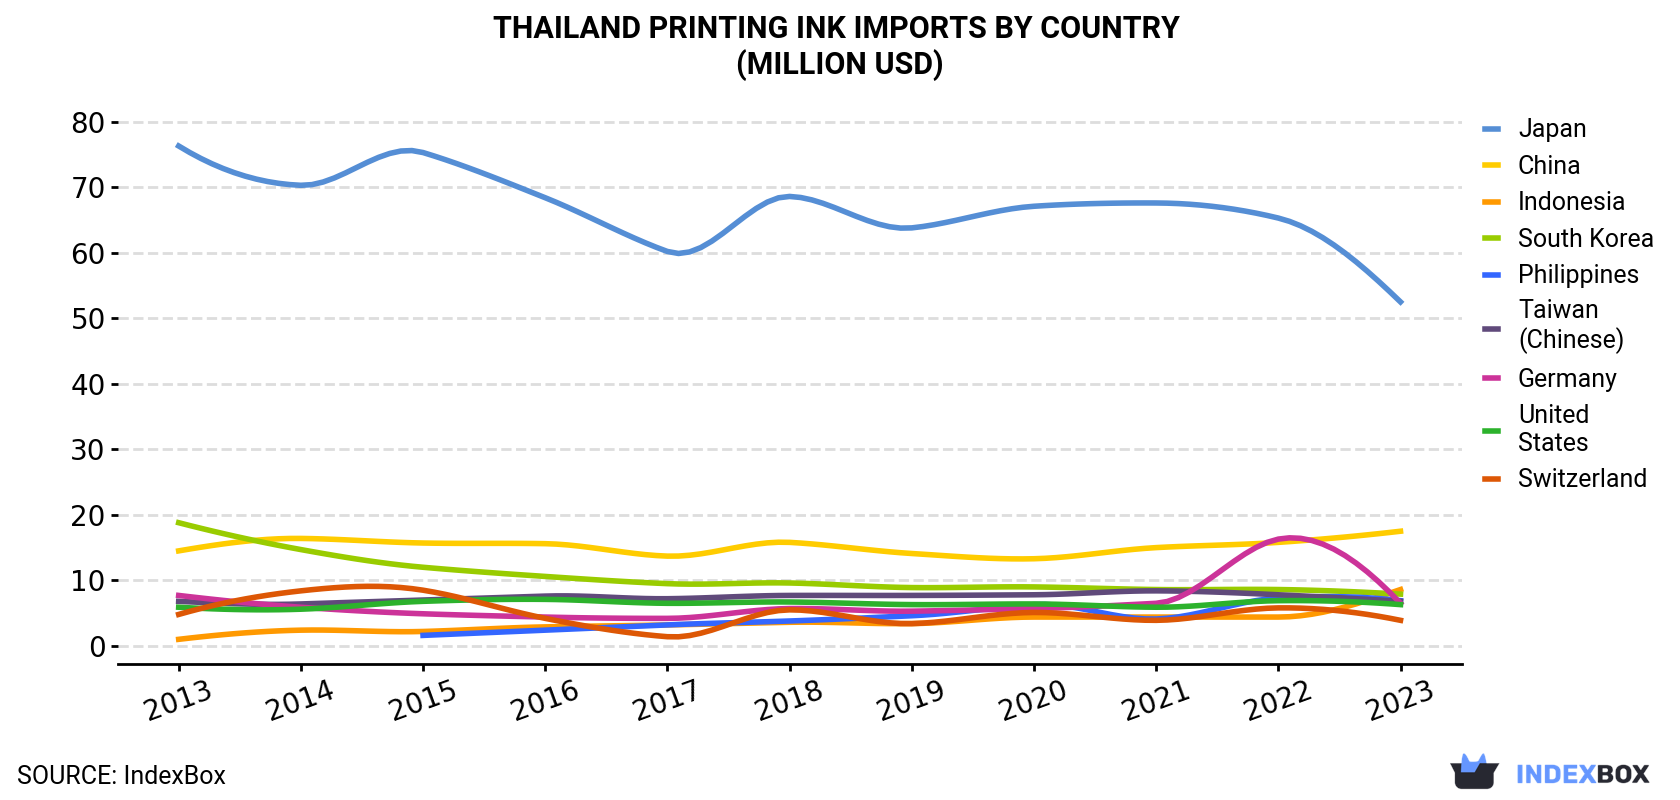 Thailand Printing Ink Imports By Country (Million USD)